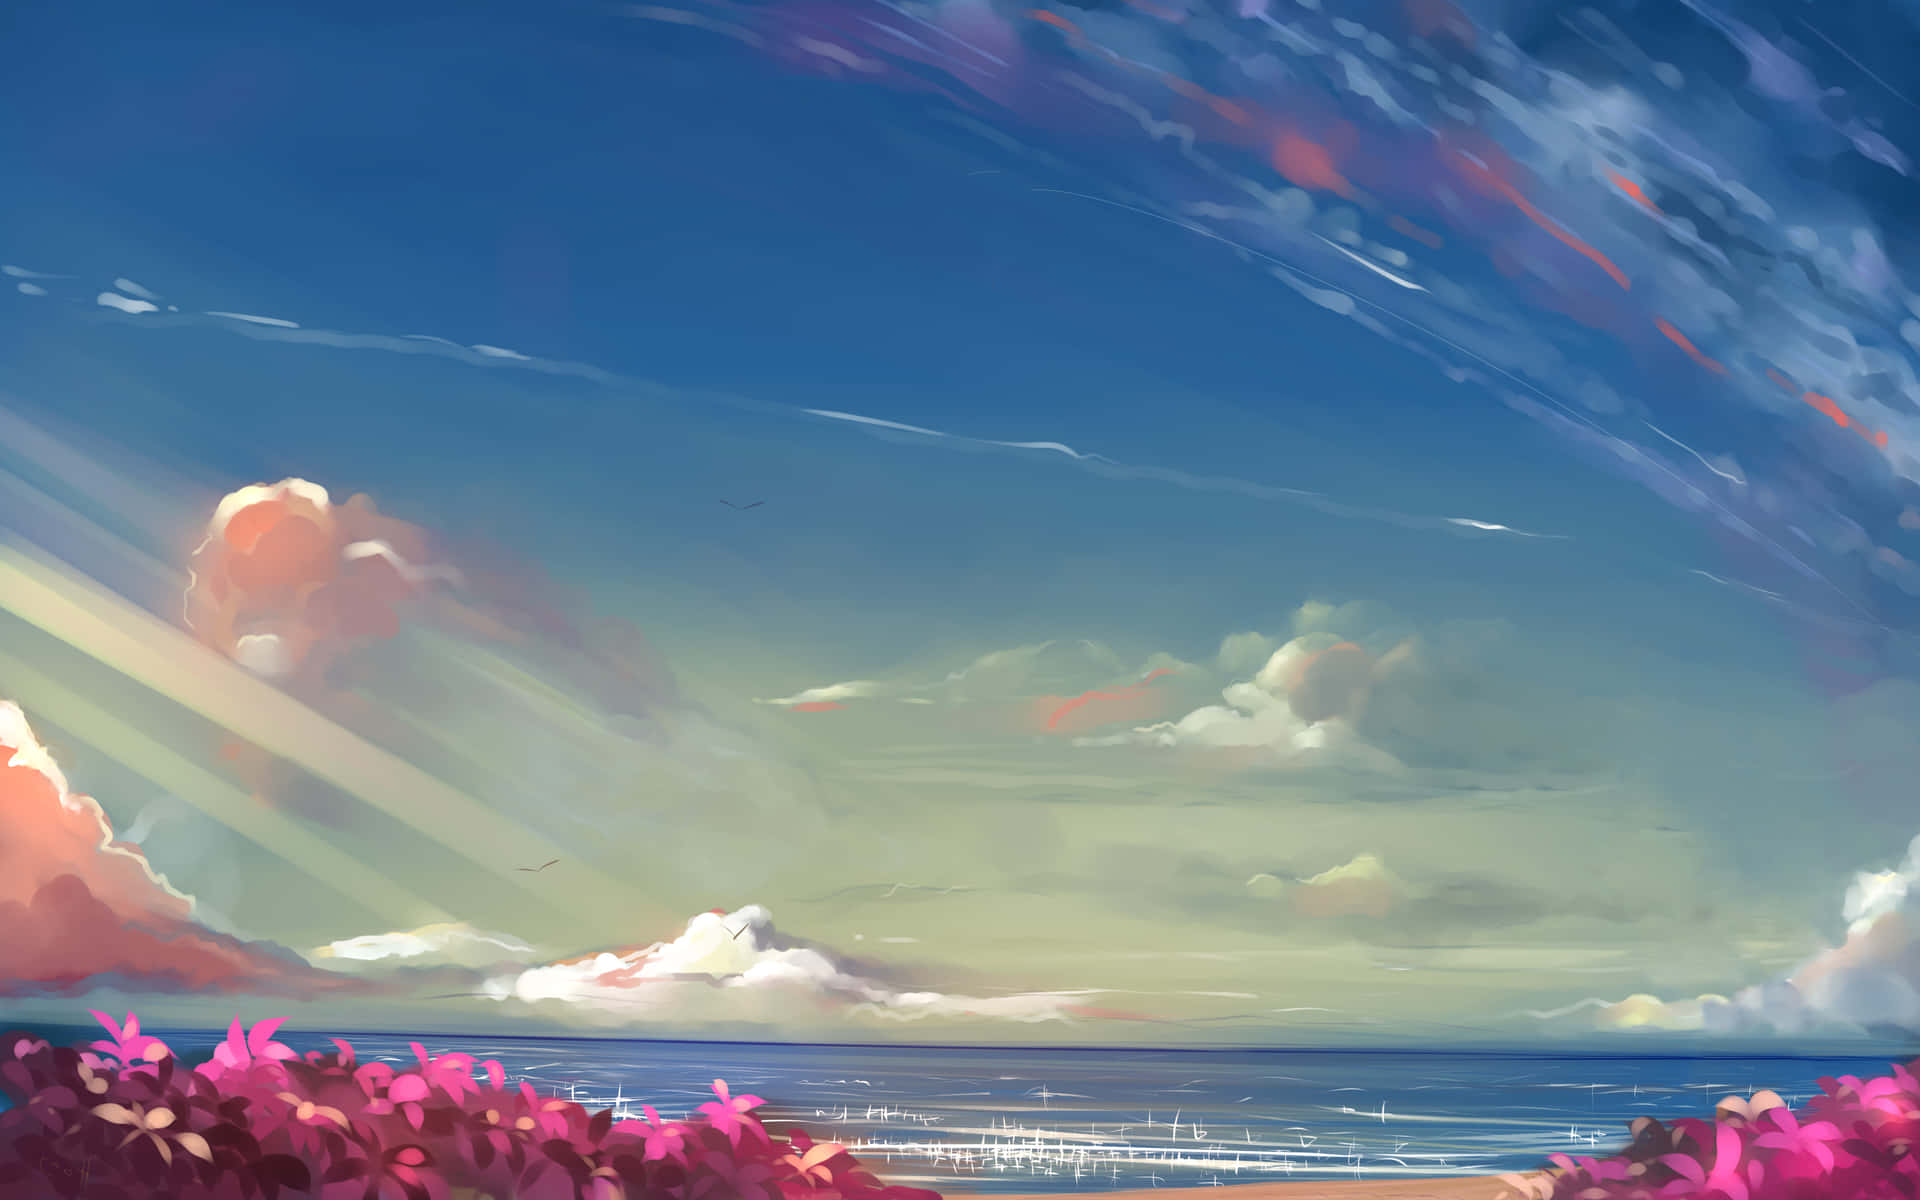 Enjoy a scenic stroll in Anime's many beautiful landscapes